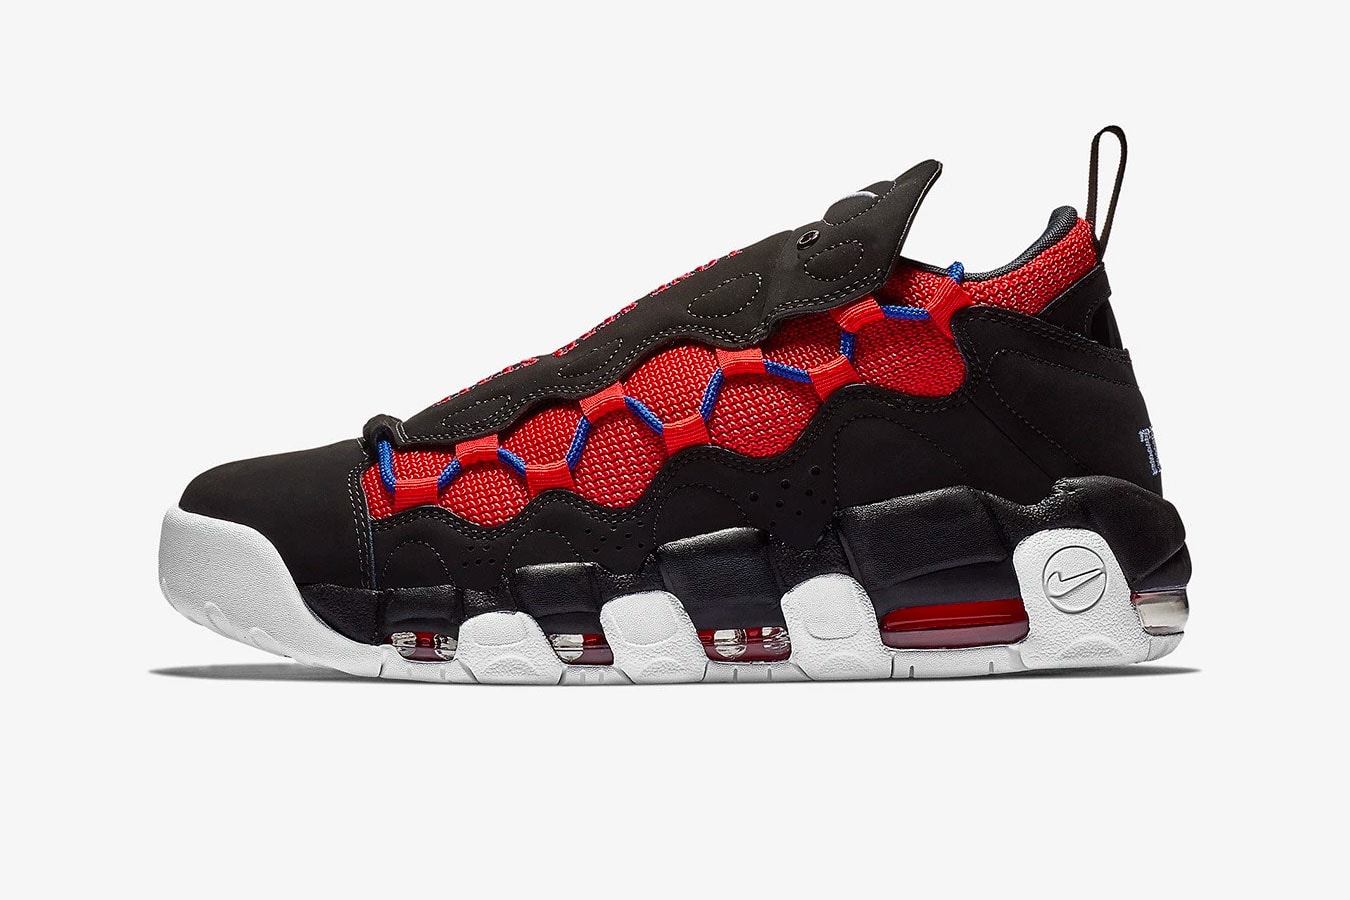 Nike Air More Money "Lone Star state" Release Date november 2018 price texas flag sneaker colorway black red blue white